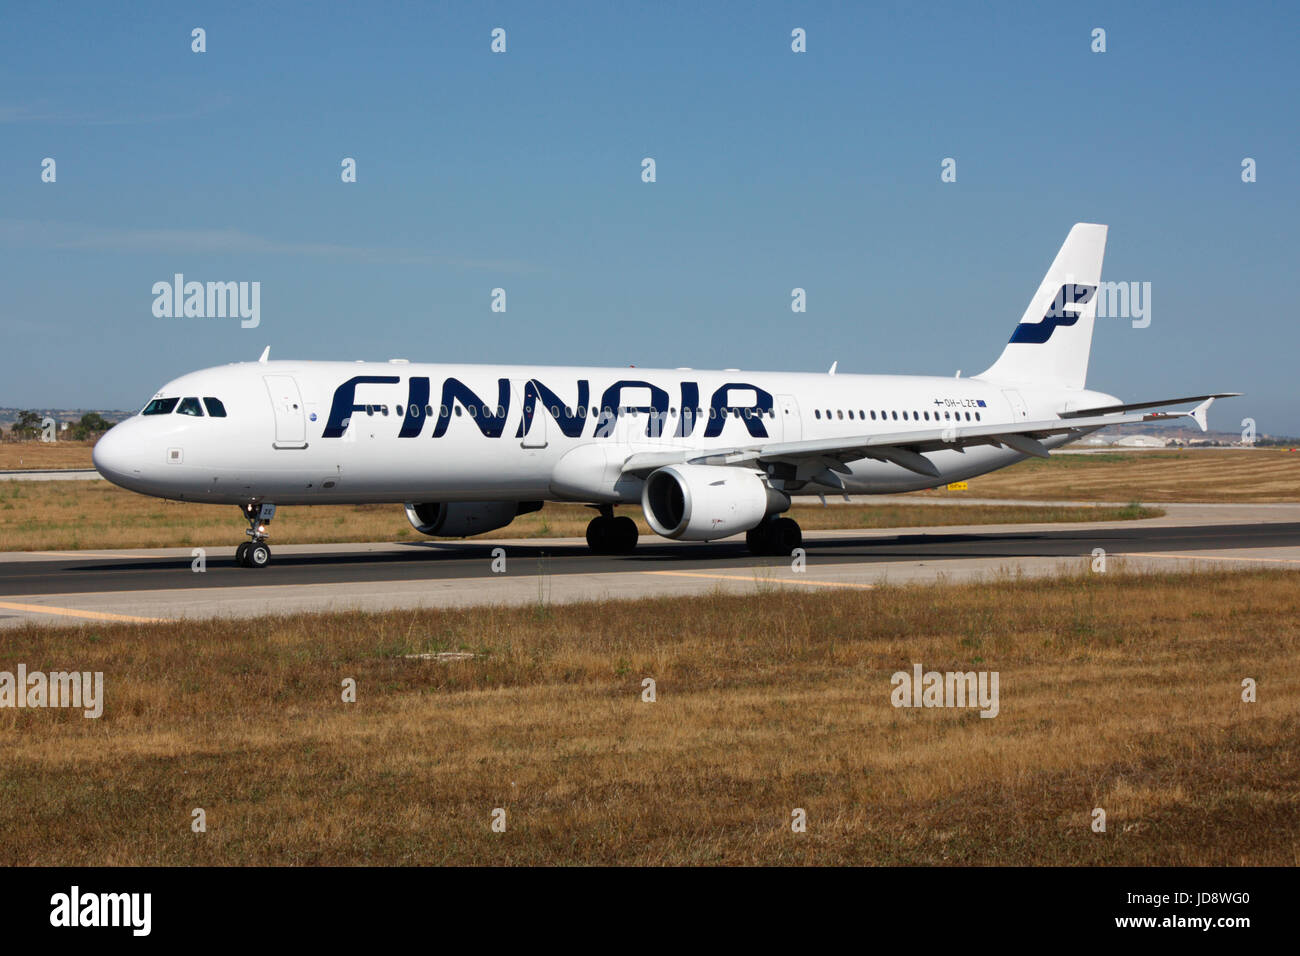 Commercial air travel. Airbus A321 passenger jet plane in the colours of Finnish airline Finnair taxiing on airport taxiway for departure from Malta Stock Photo